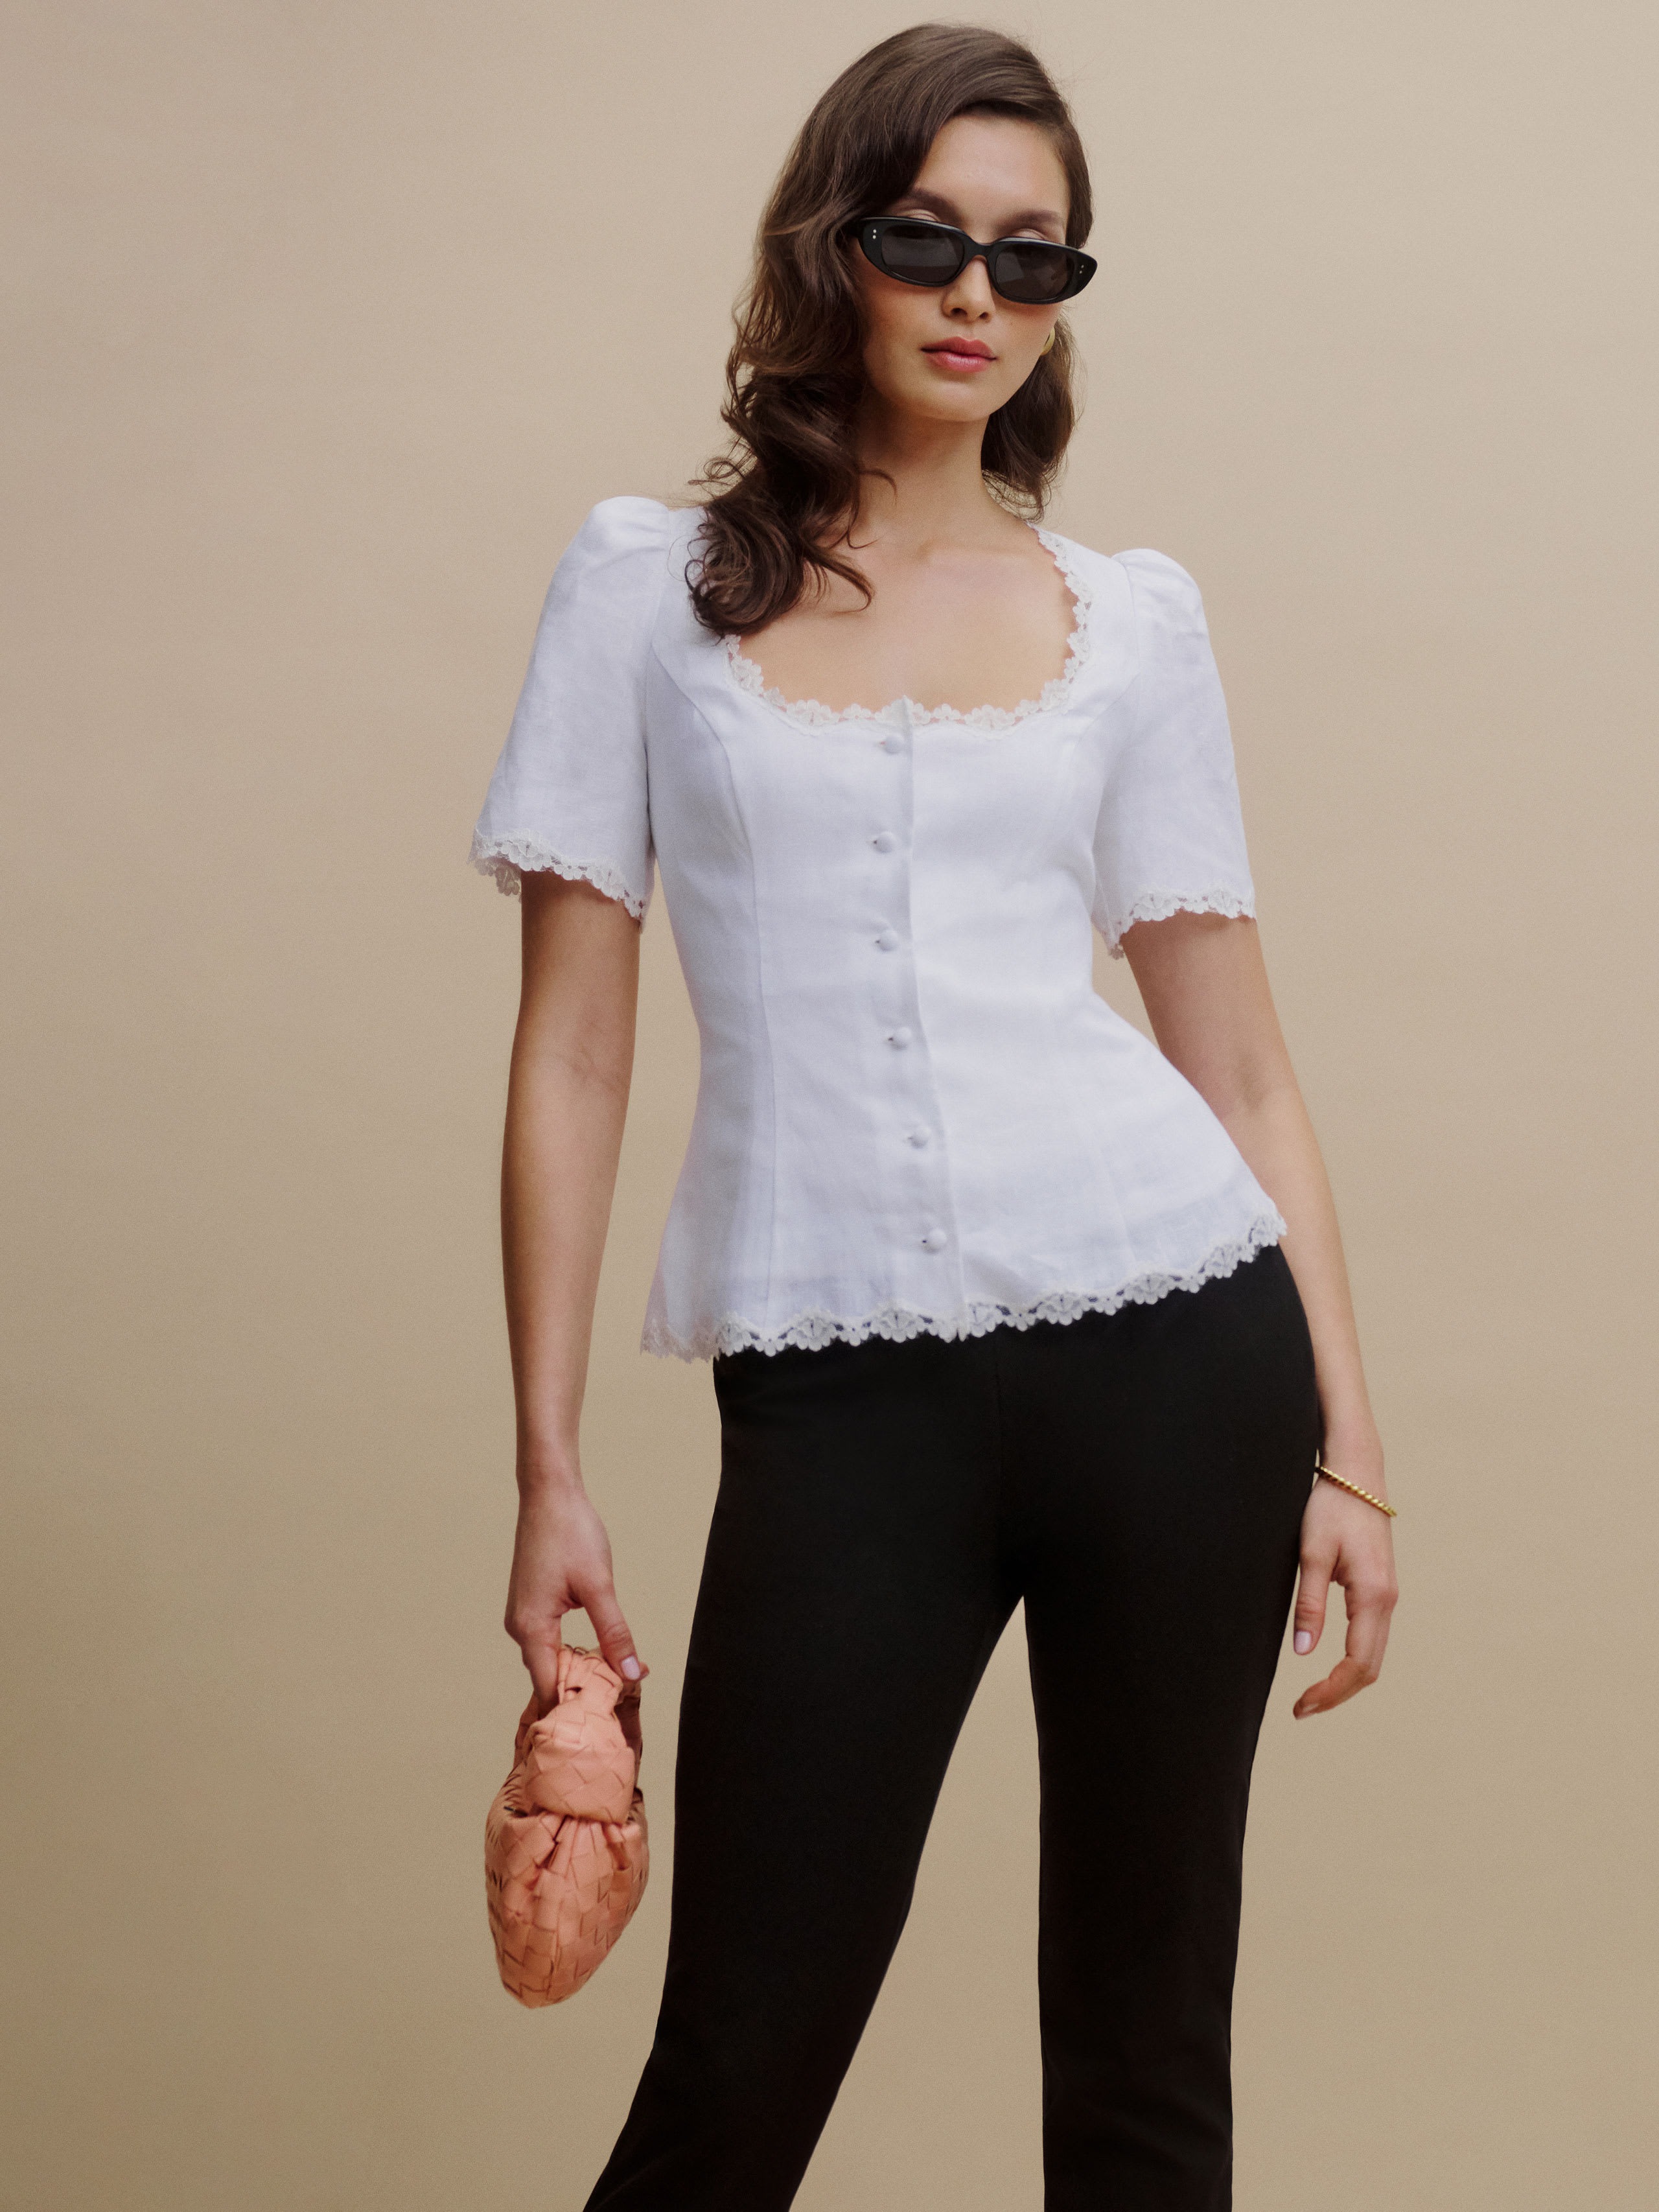 Reformation white linen top